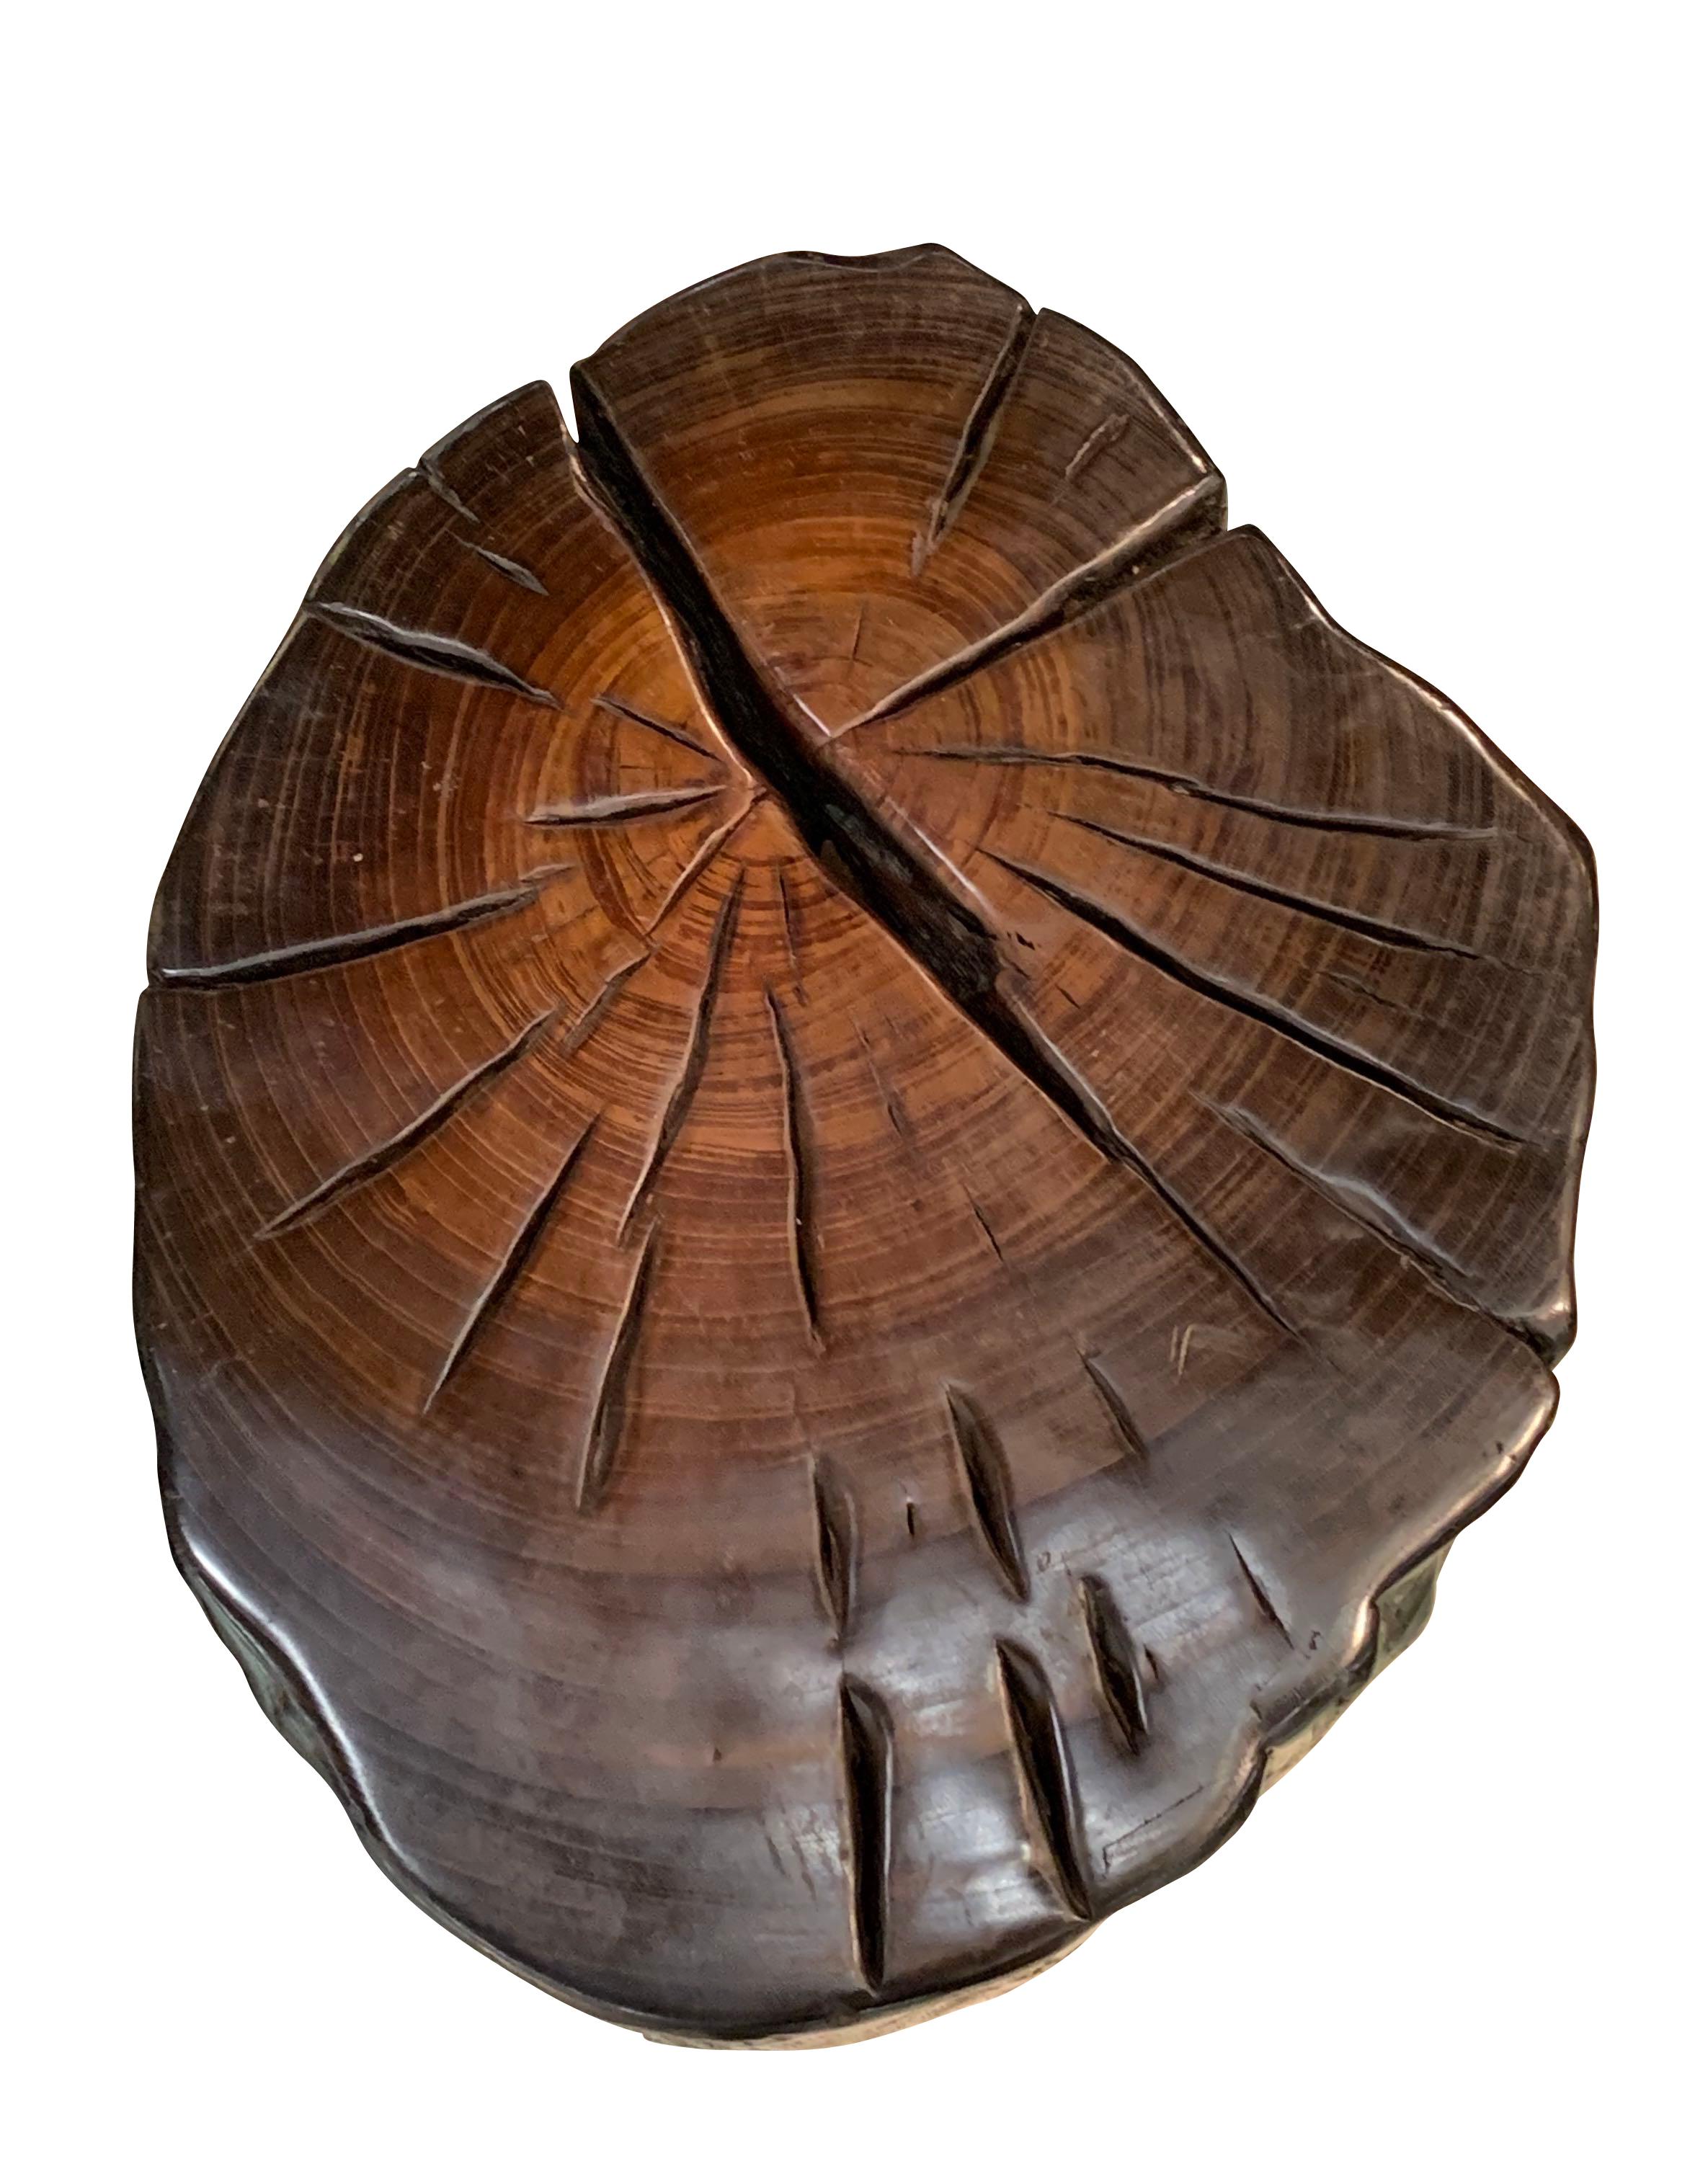 This Indonesian Walang tree side table is dark brown in color, has textured sides and a flat top.
The top has lighter brown shading at the center giving it an ombre effect and defines the rings of the tree.
It has a beautiful polished finish and